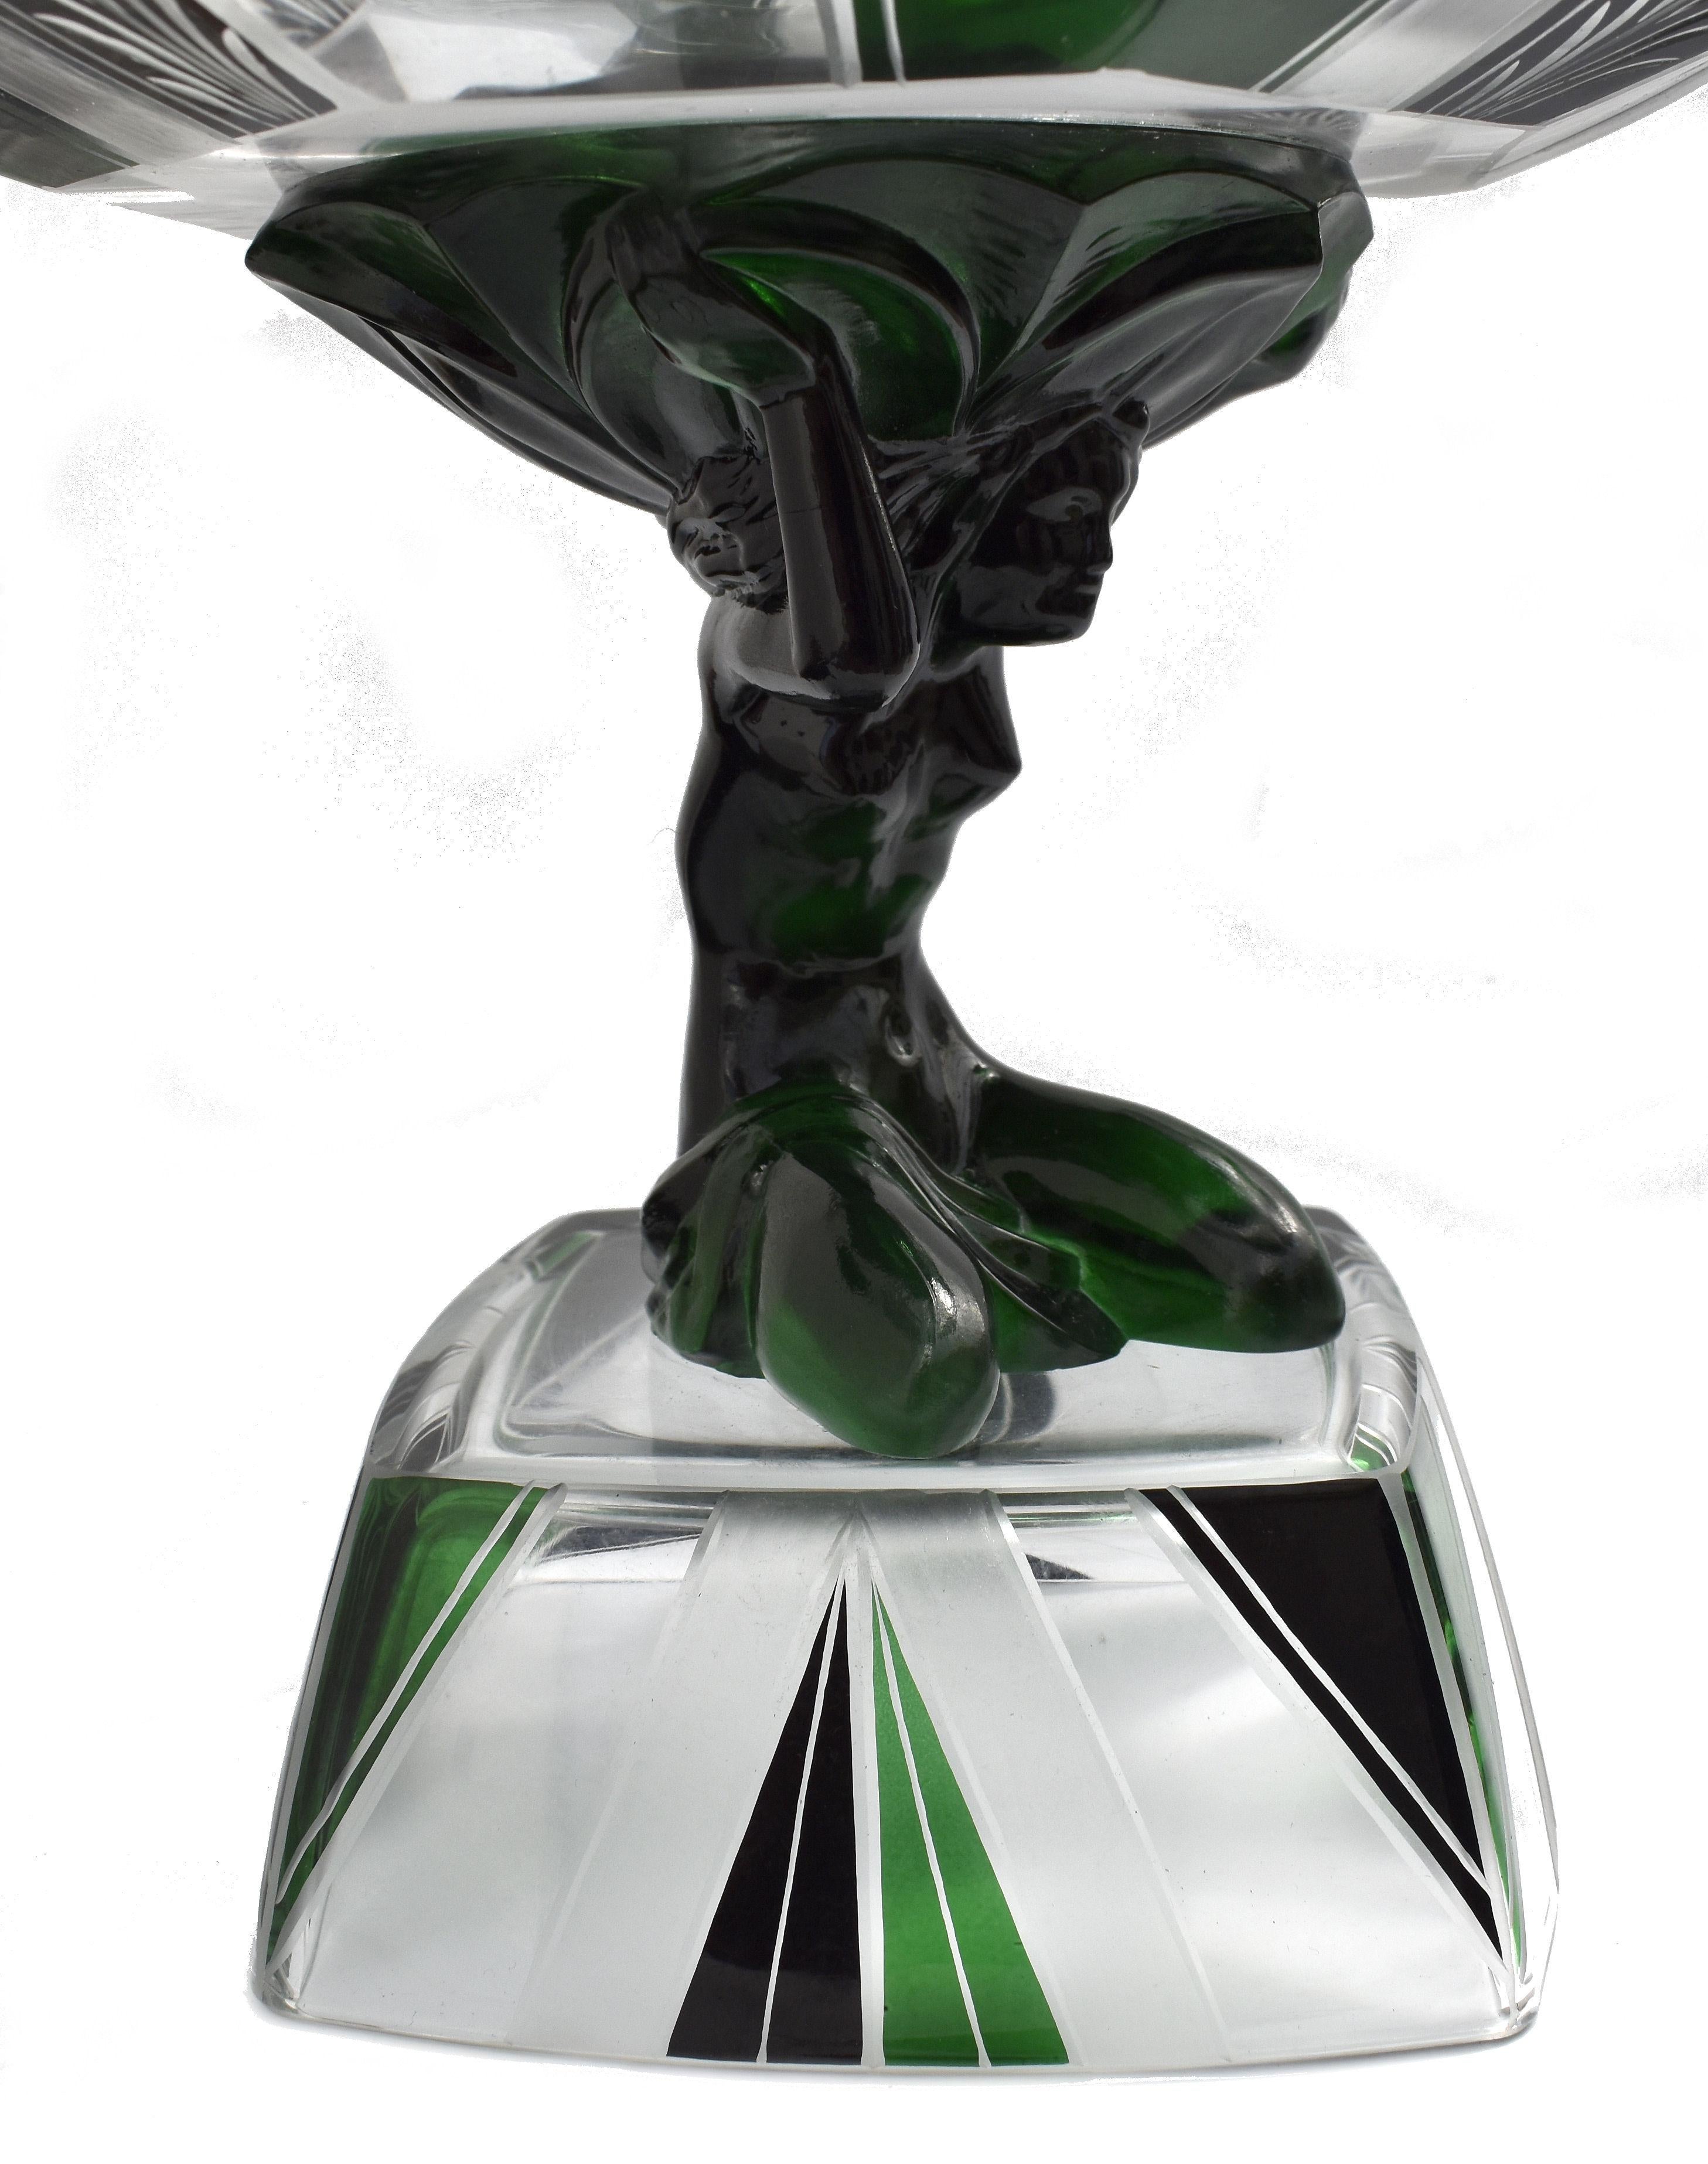 This is without doubt one of our all time favourite Art Deco comports. Originating from Czech republic and made by Karl Palda this comport packs two punches, not only visually with it's very distinctive green and jet black enamel accents/design but